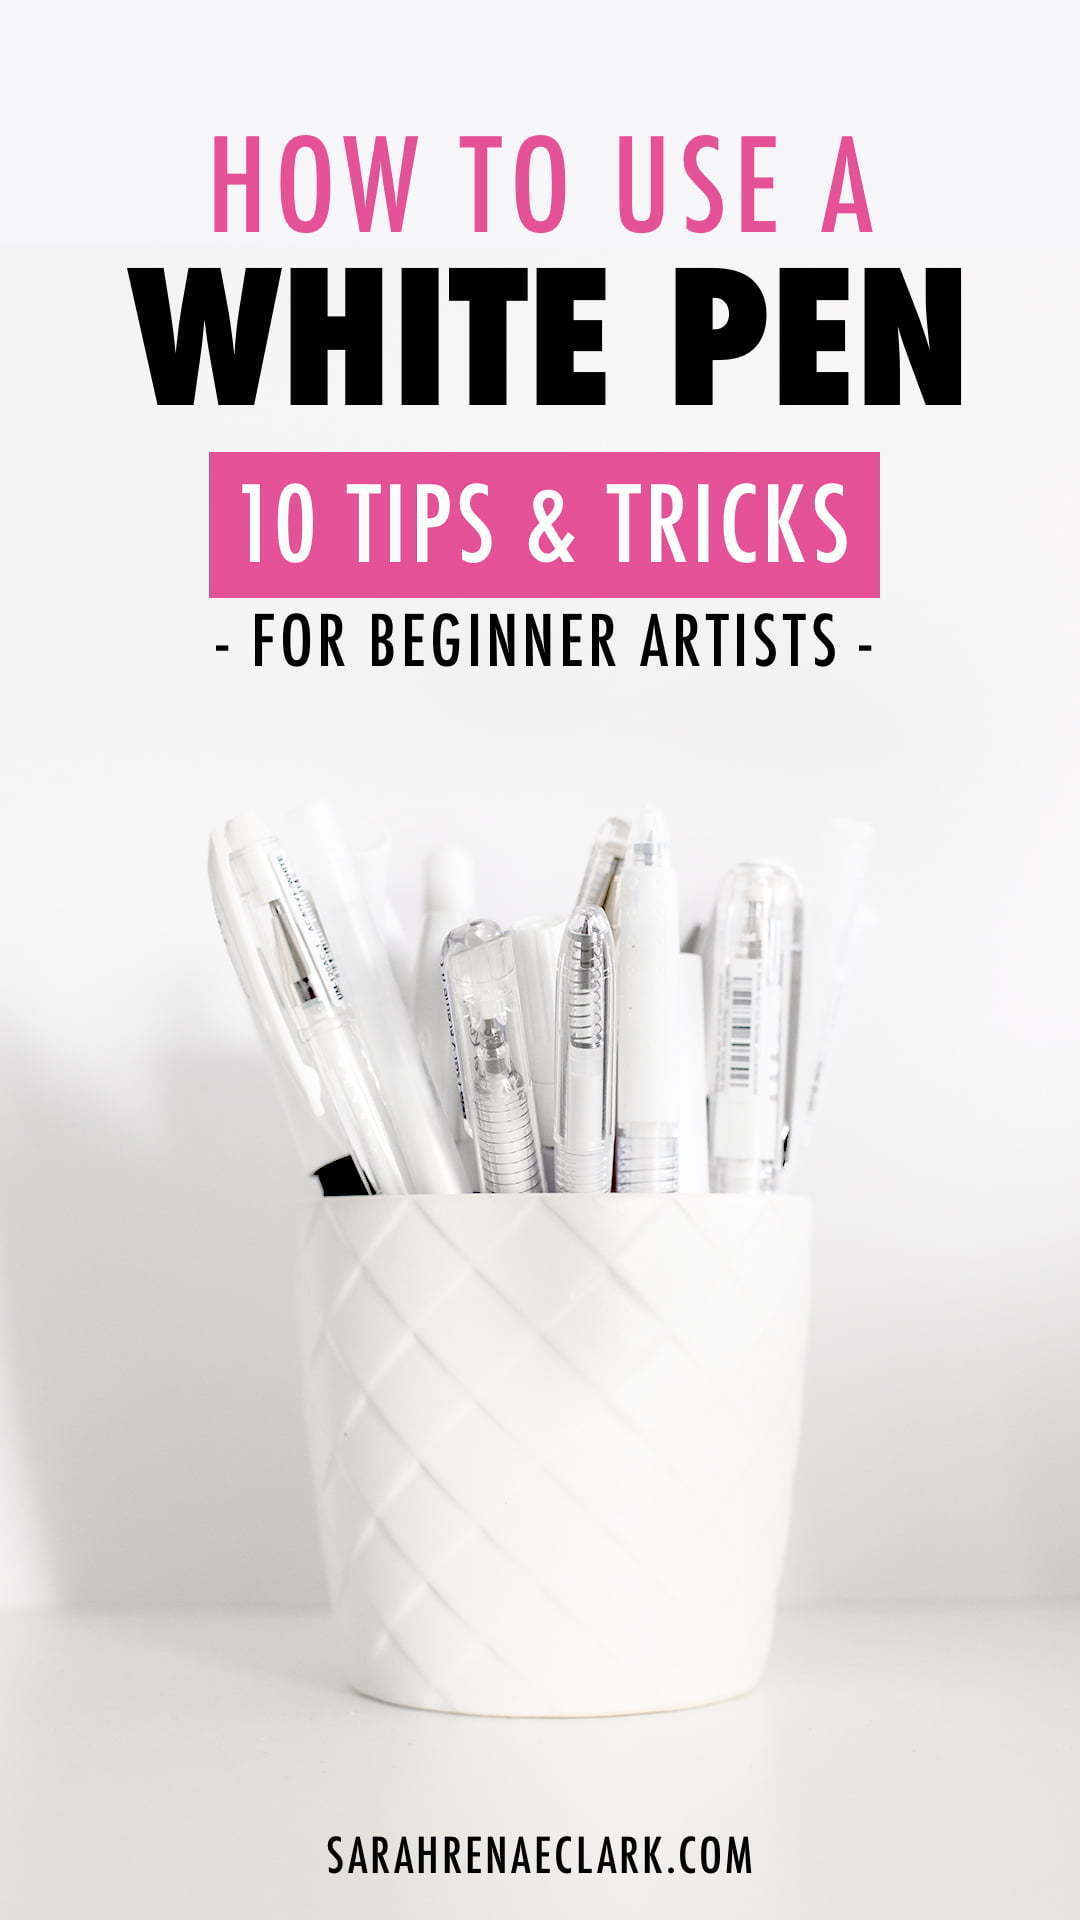 How to Use a White Pen - 10 Tips & Tricks for Beginner Artists